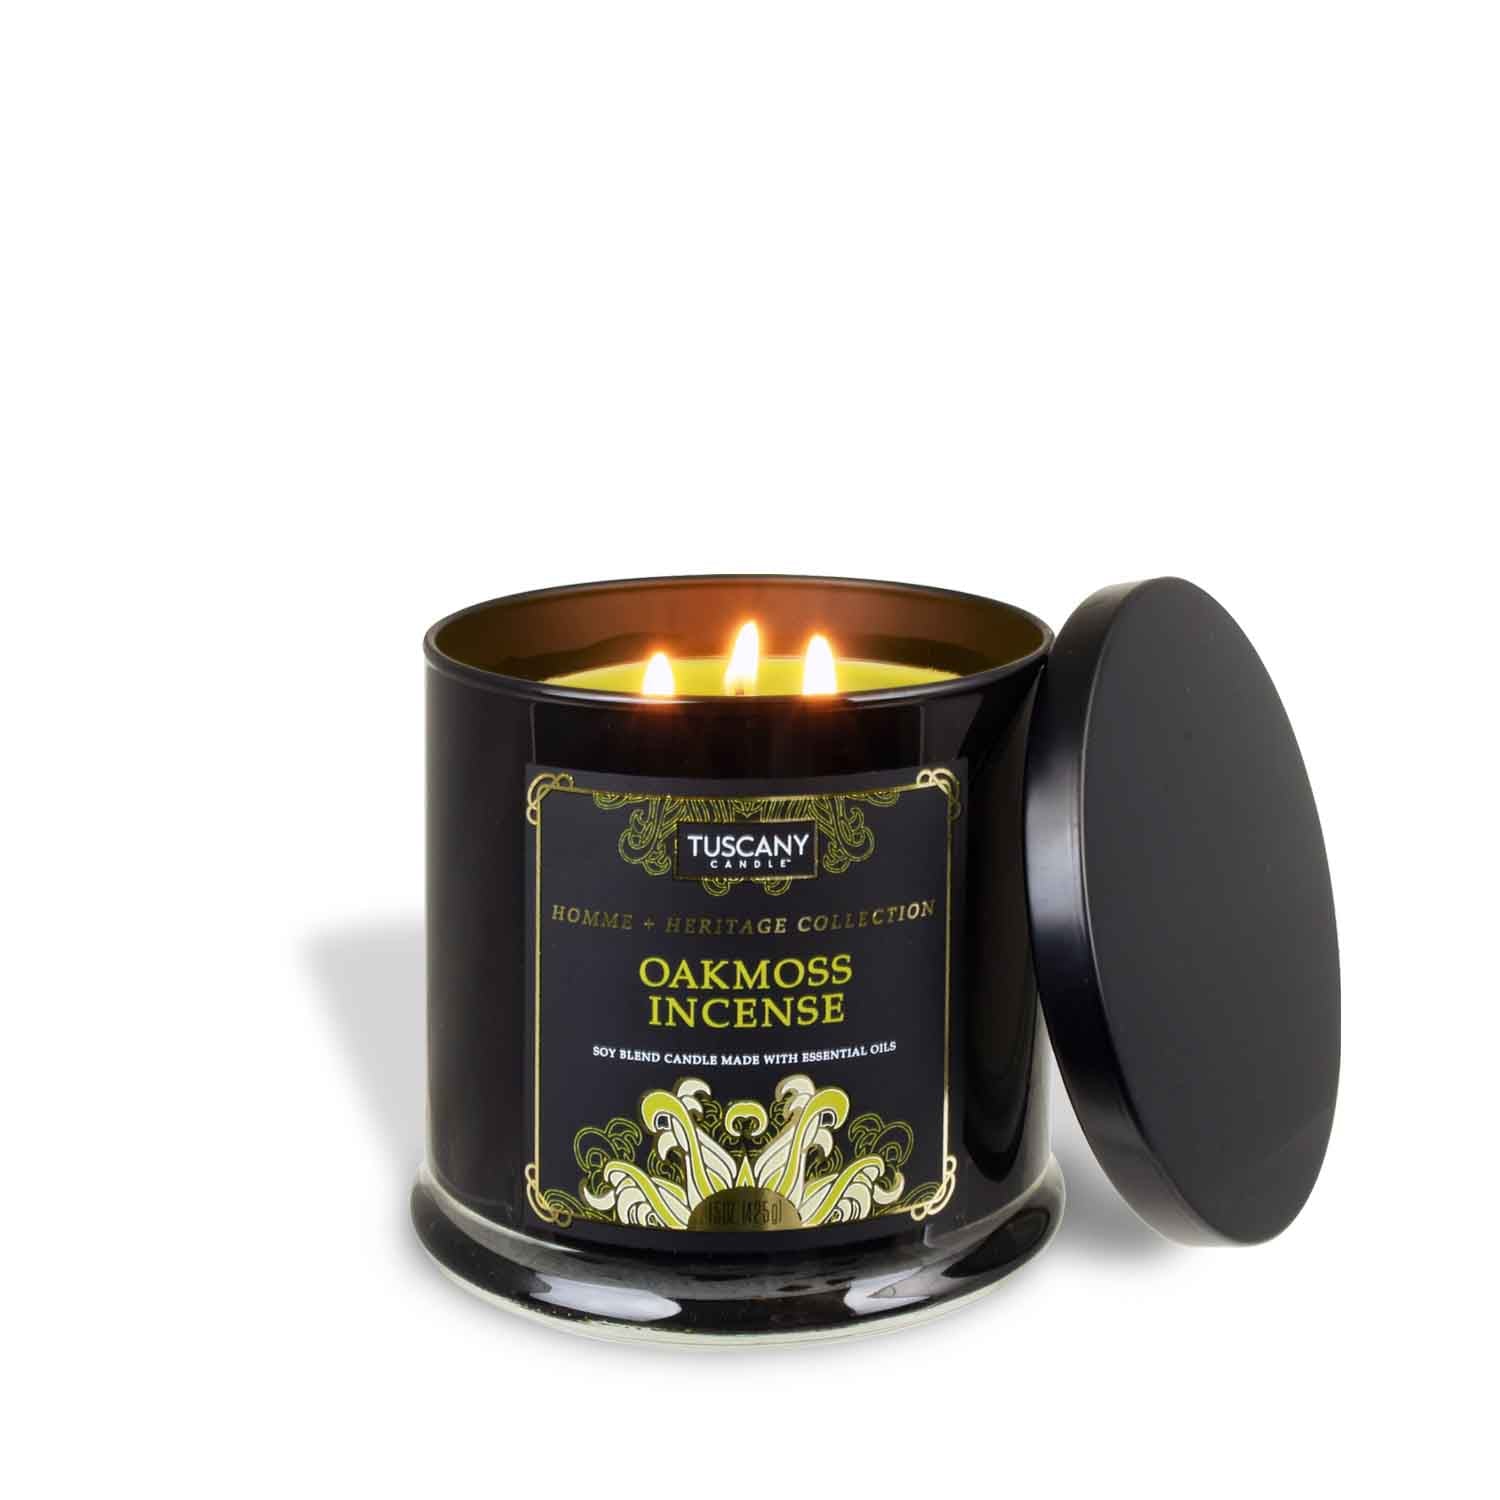 An Oakmoss Incense Scented Jar Candle (15 oz) from Tuscany Candle in a black tin on a white background.